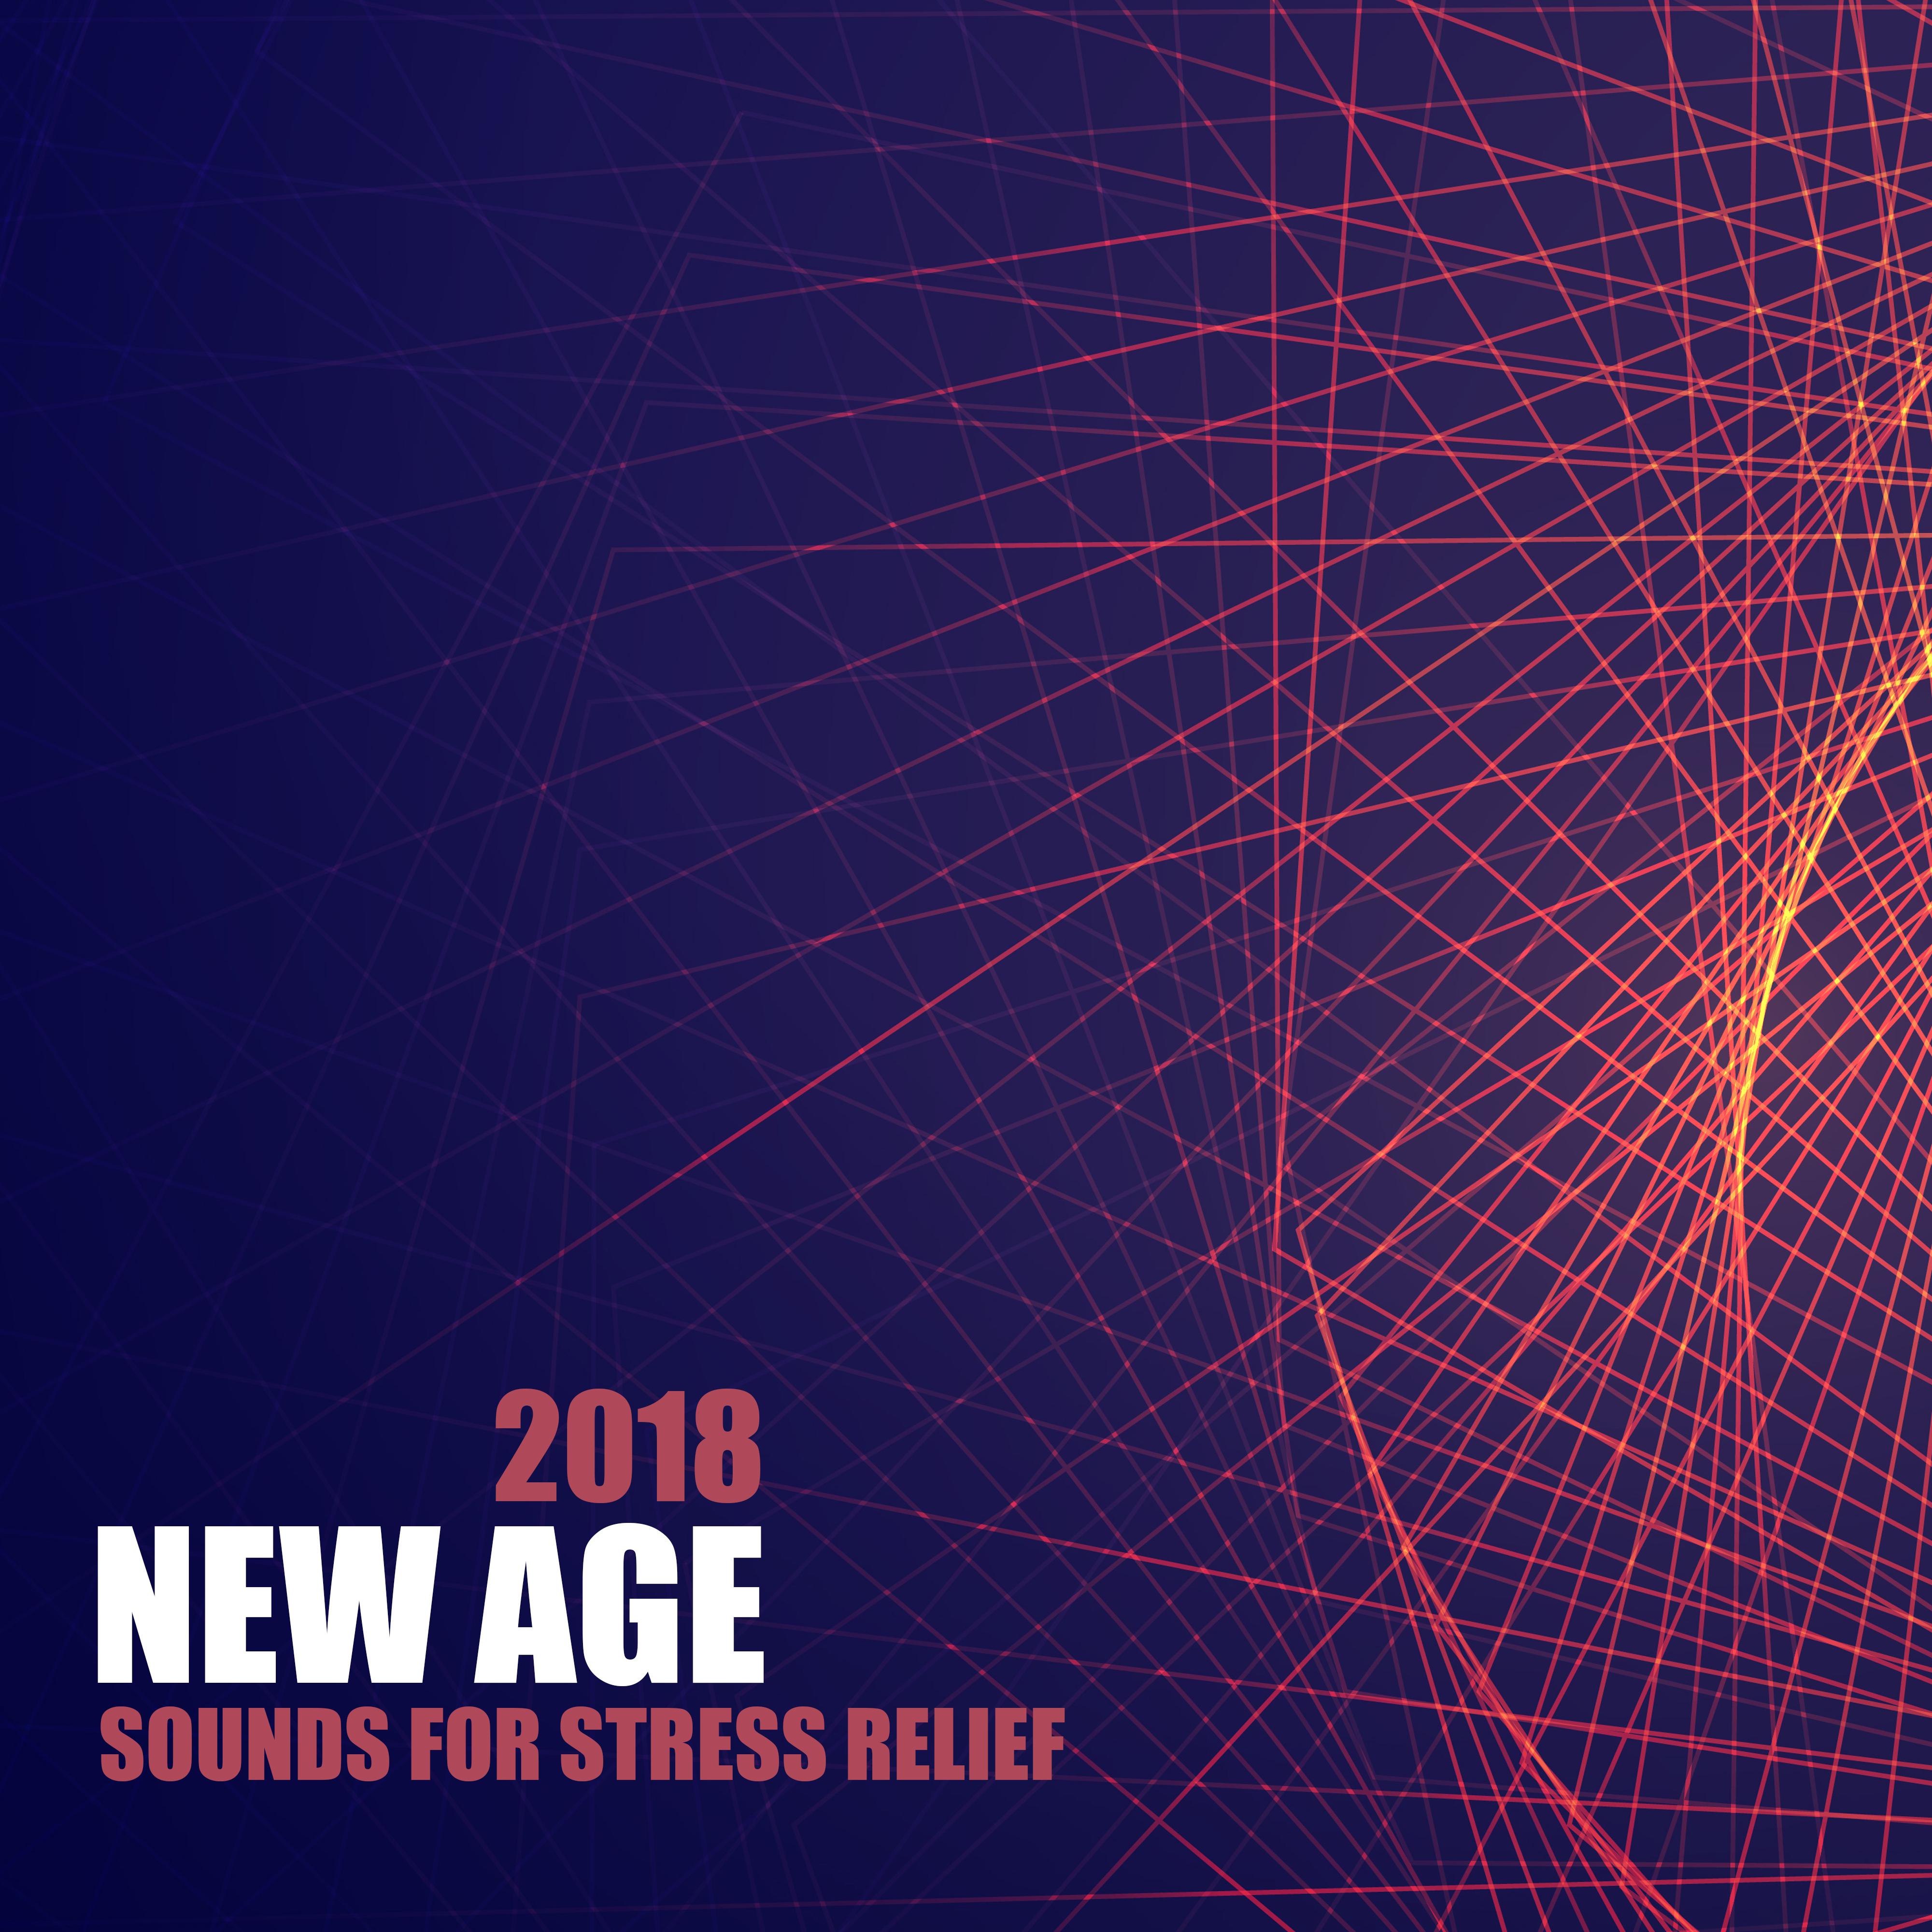 2018 New Age Sounds for Stress Relief